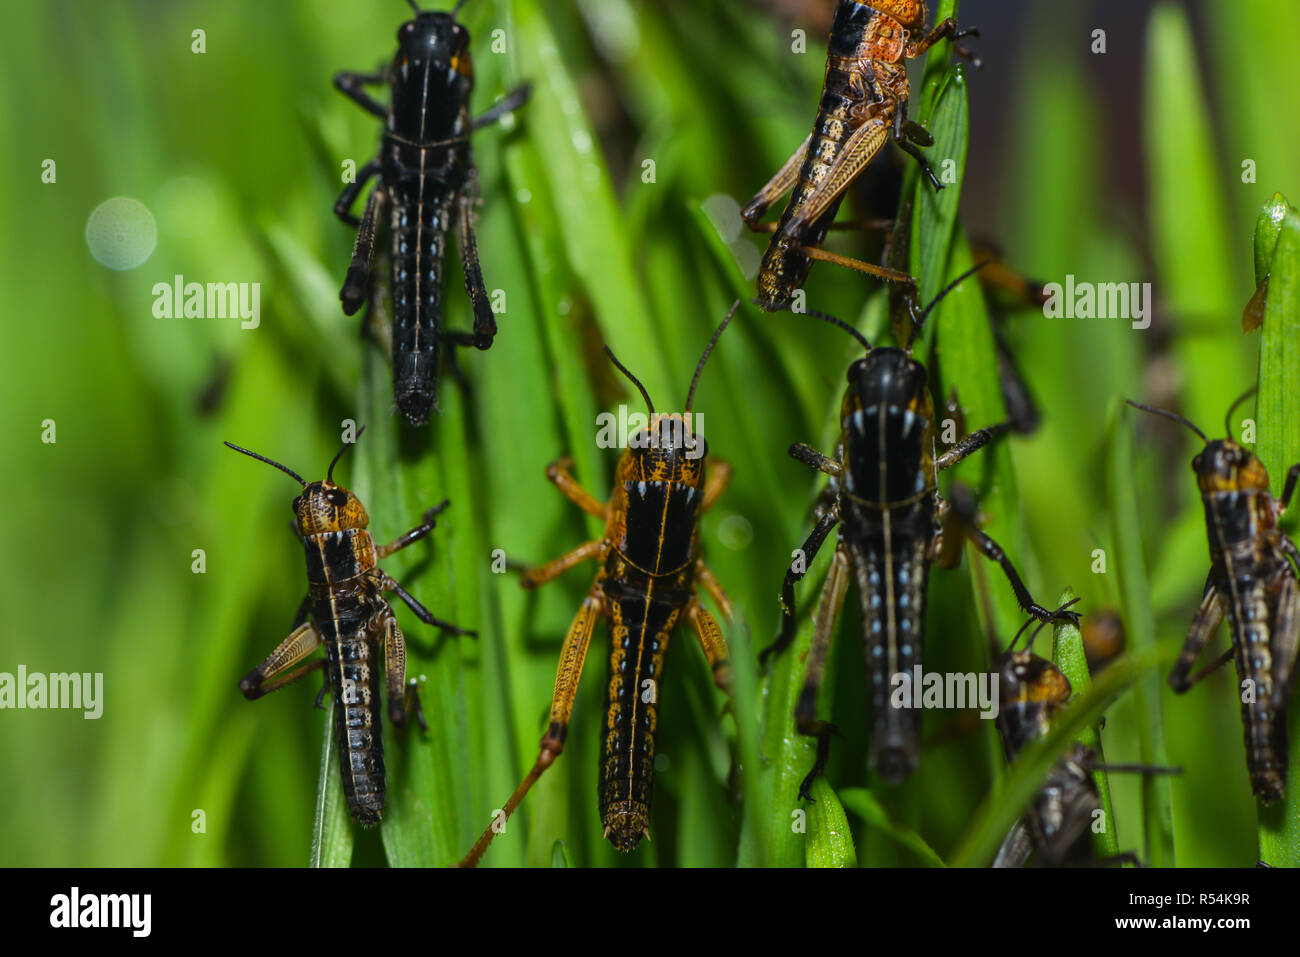 migratory grasshoppers in the grass Stock Photo